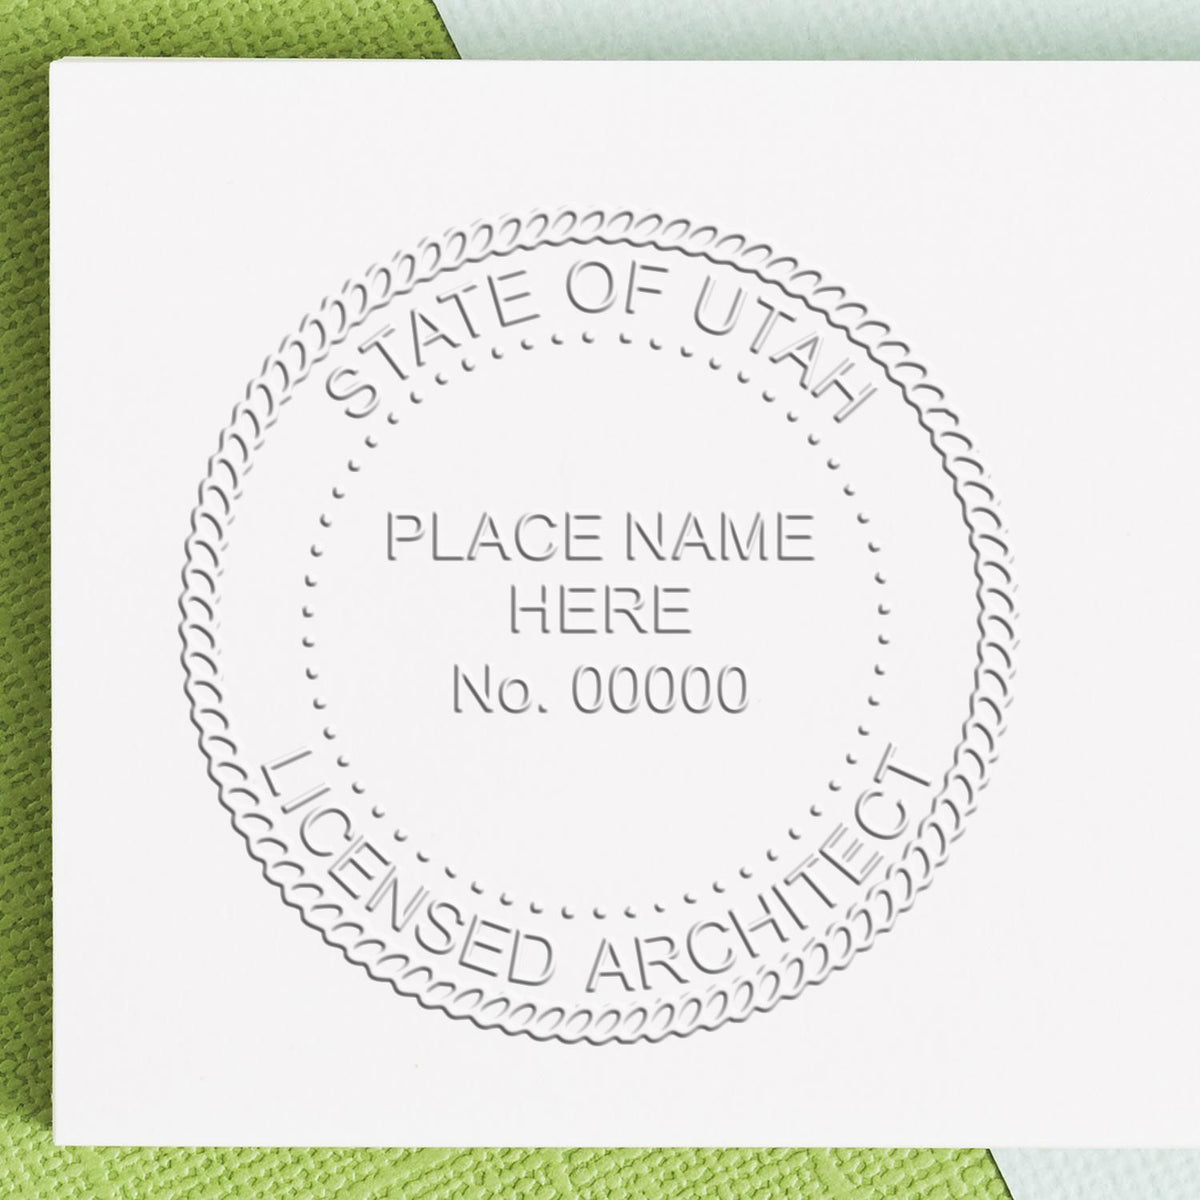 A photograph of the Hybrid Utah Architect Seal stamp impression reveals a vivid, professional image of the on paper.